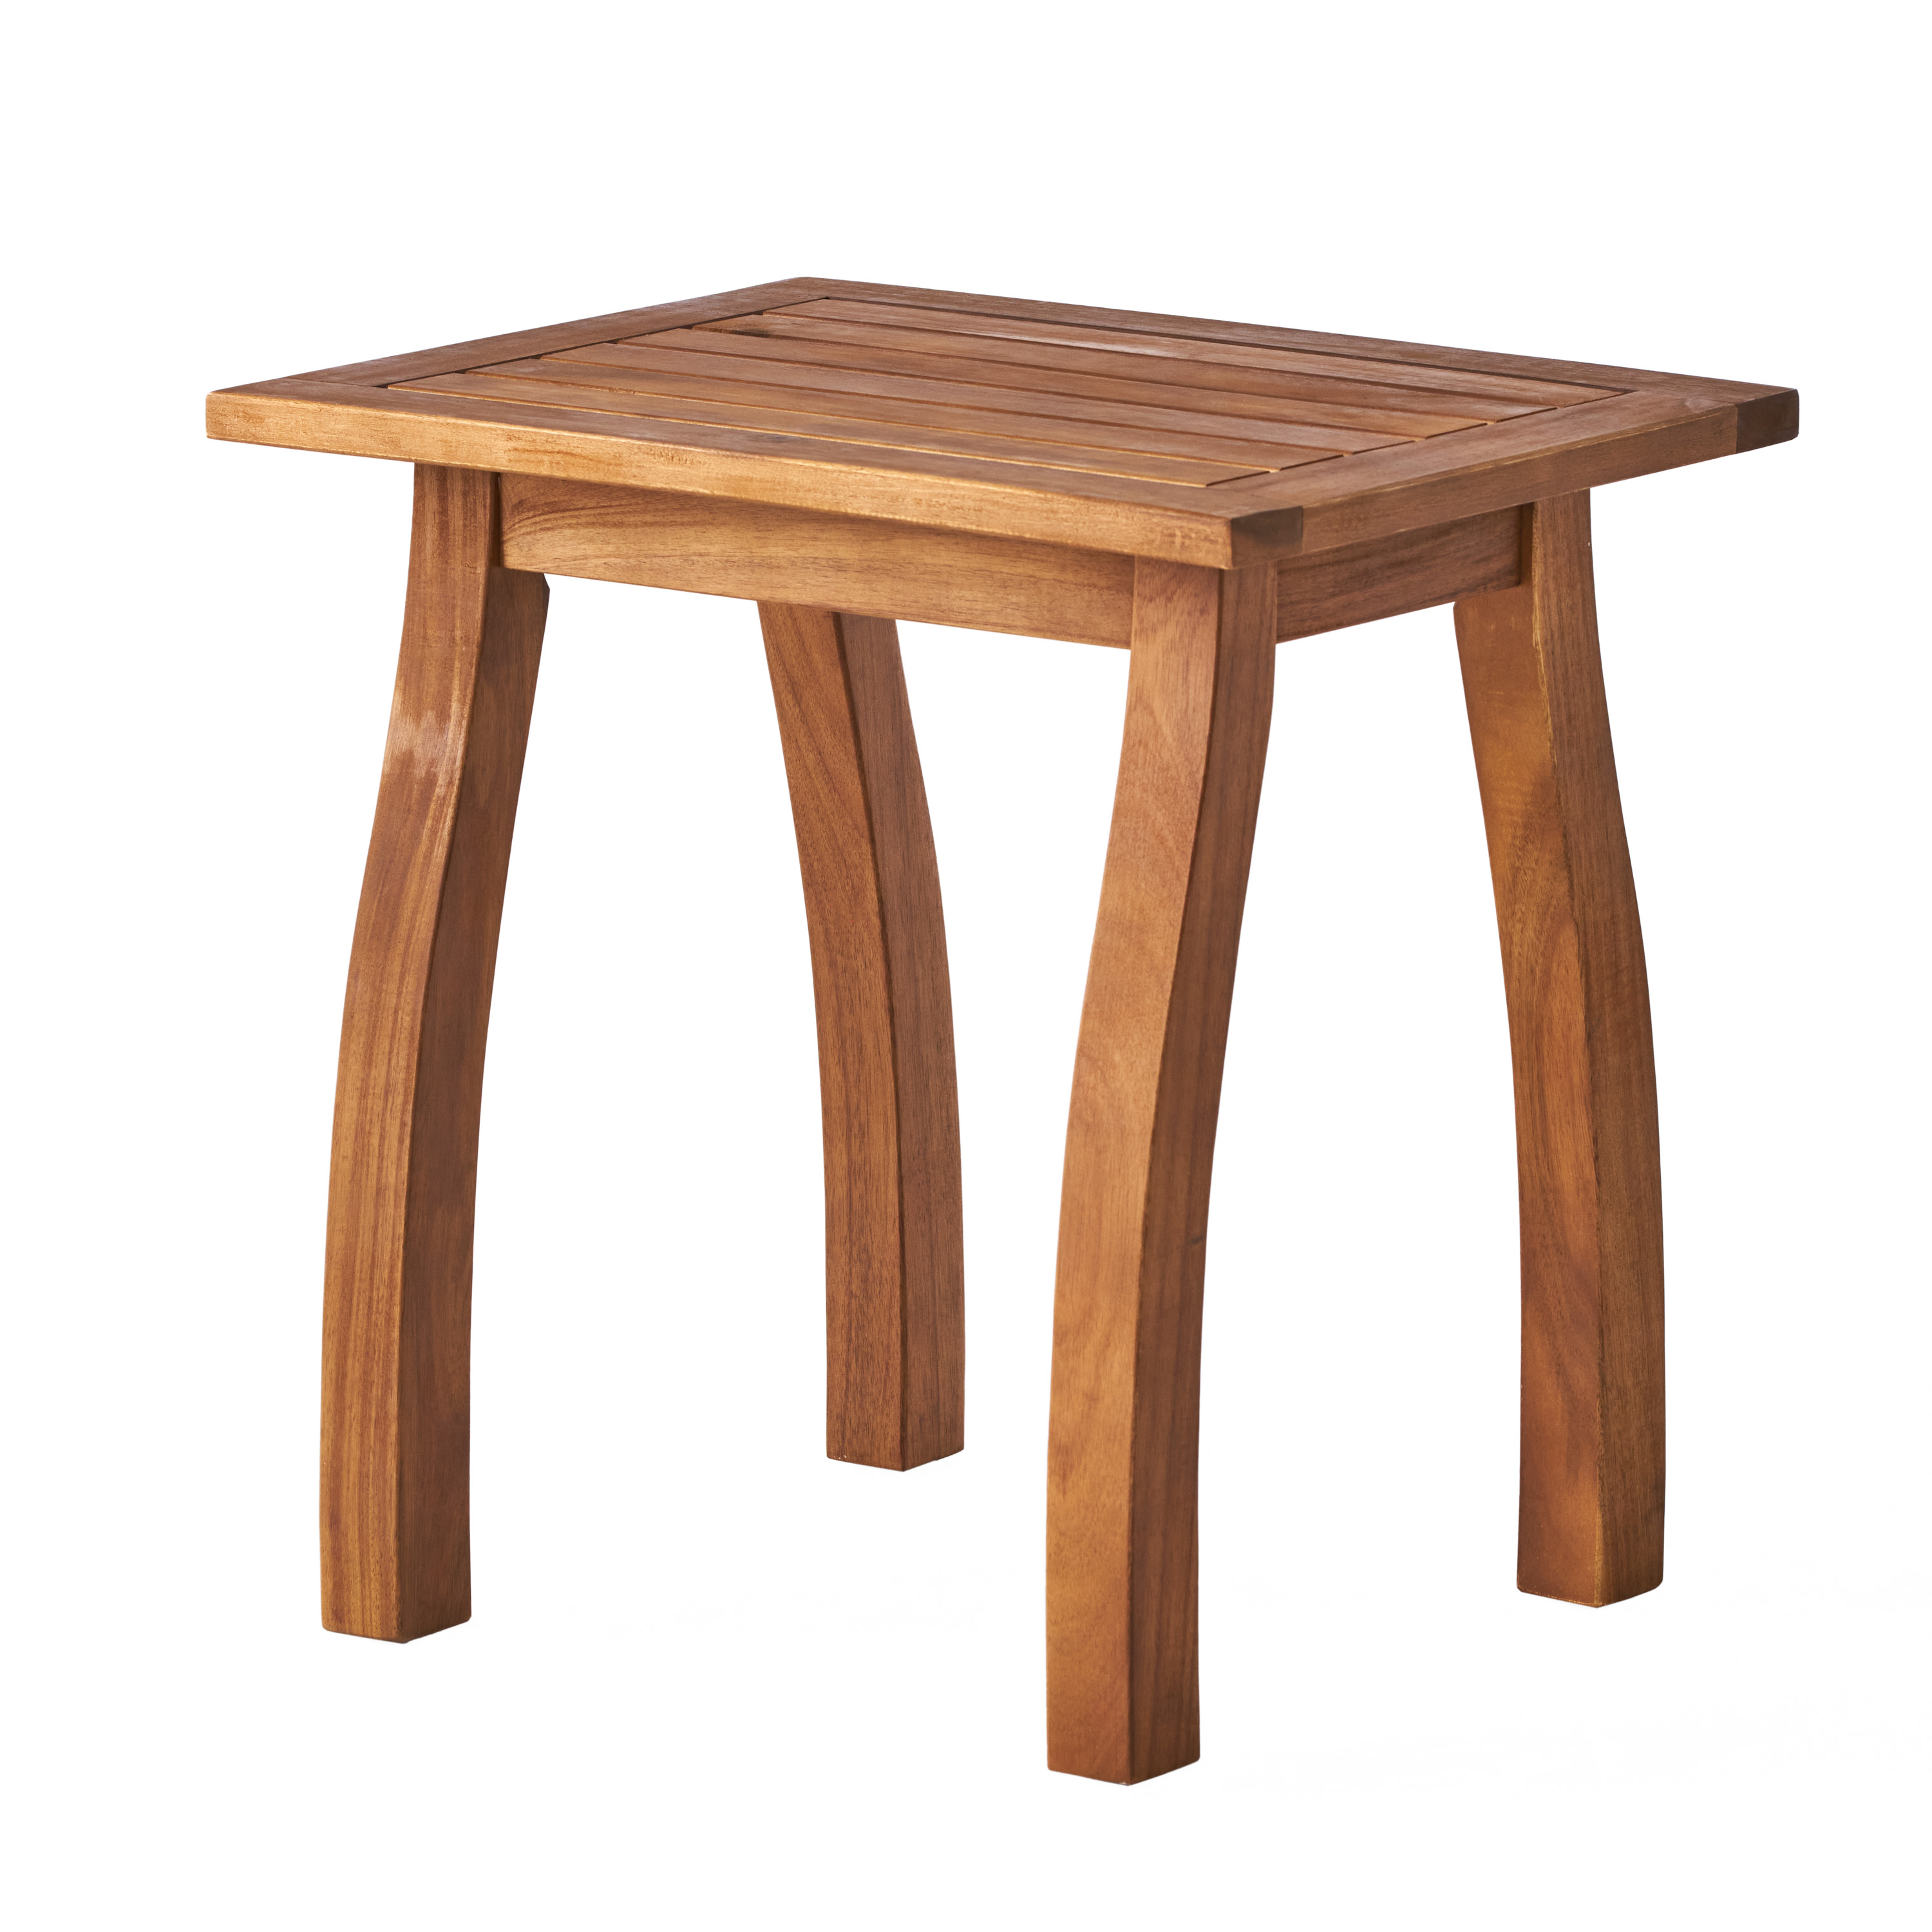 Carlo Outdoor Rectangular Acacia Wood Accent Table, Brown & Teak Finish - image 1 of 10